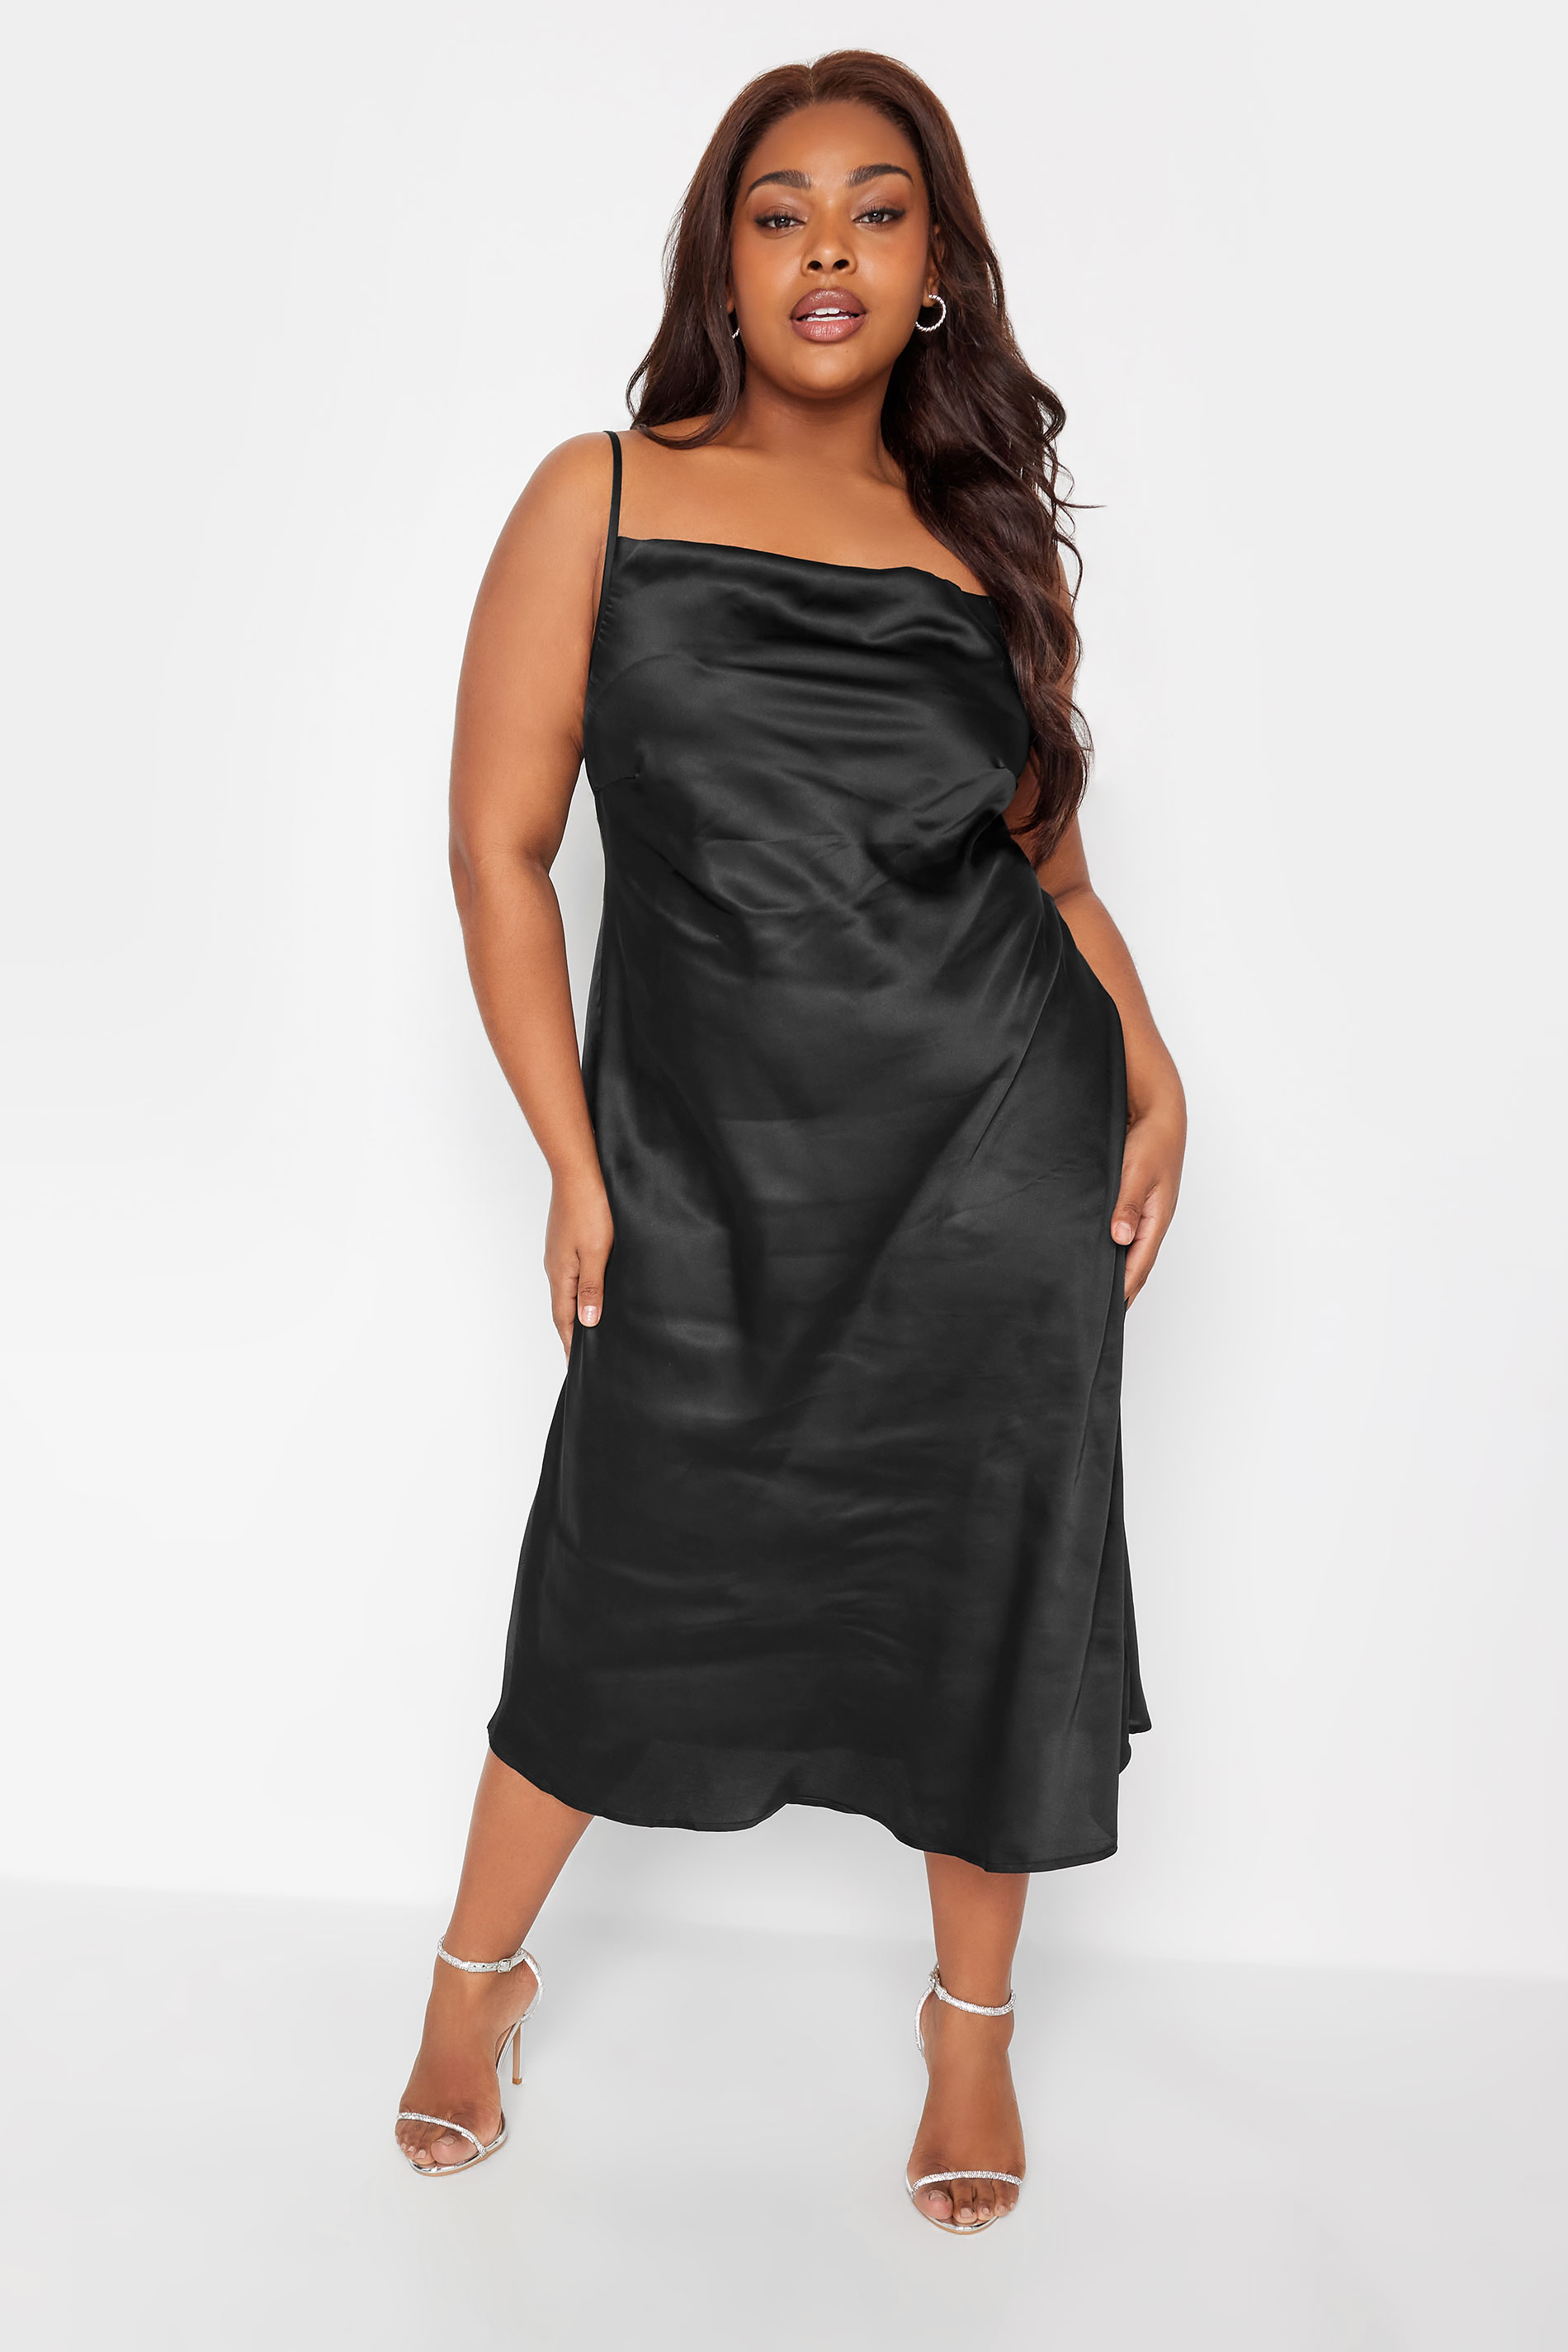 LIMITED COLLECTION Plus Size Black Cowl Neck Dress | Yours Clothing  1